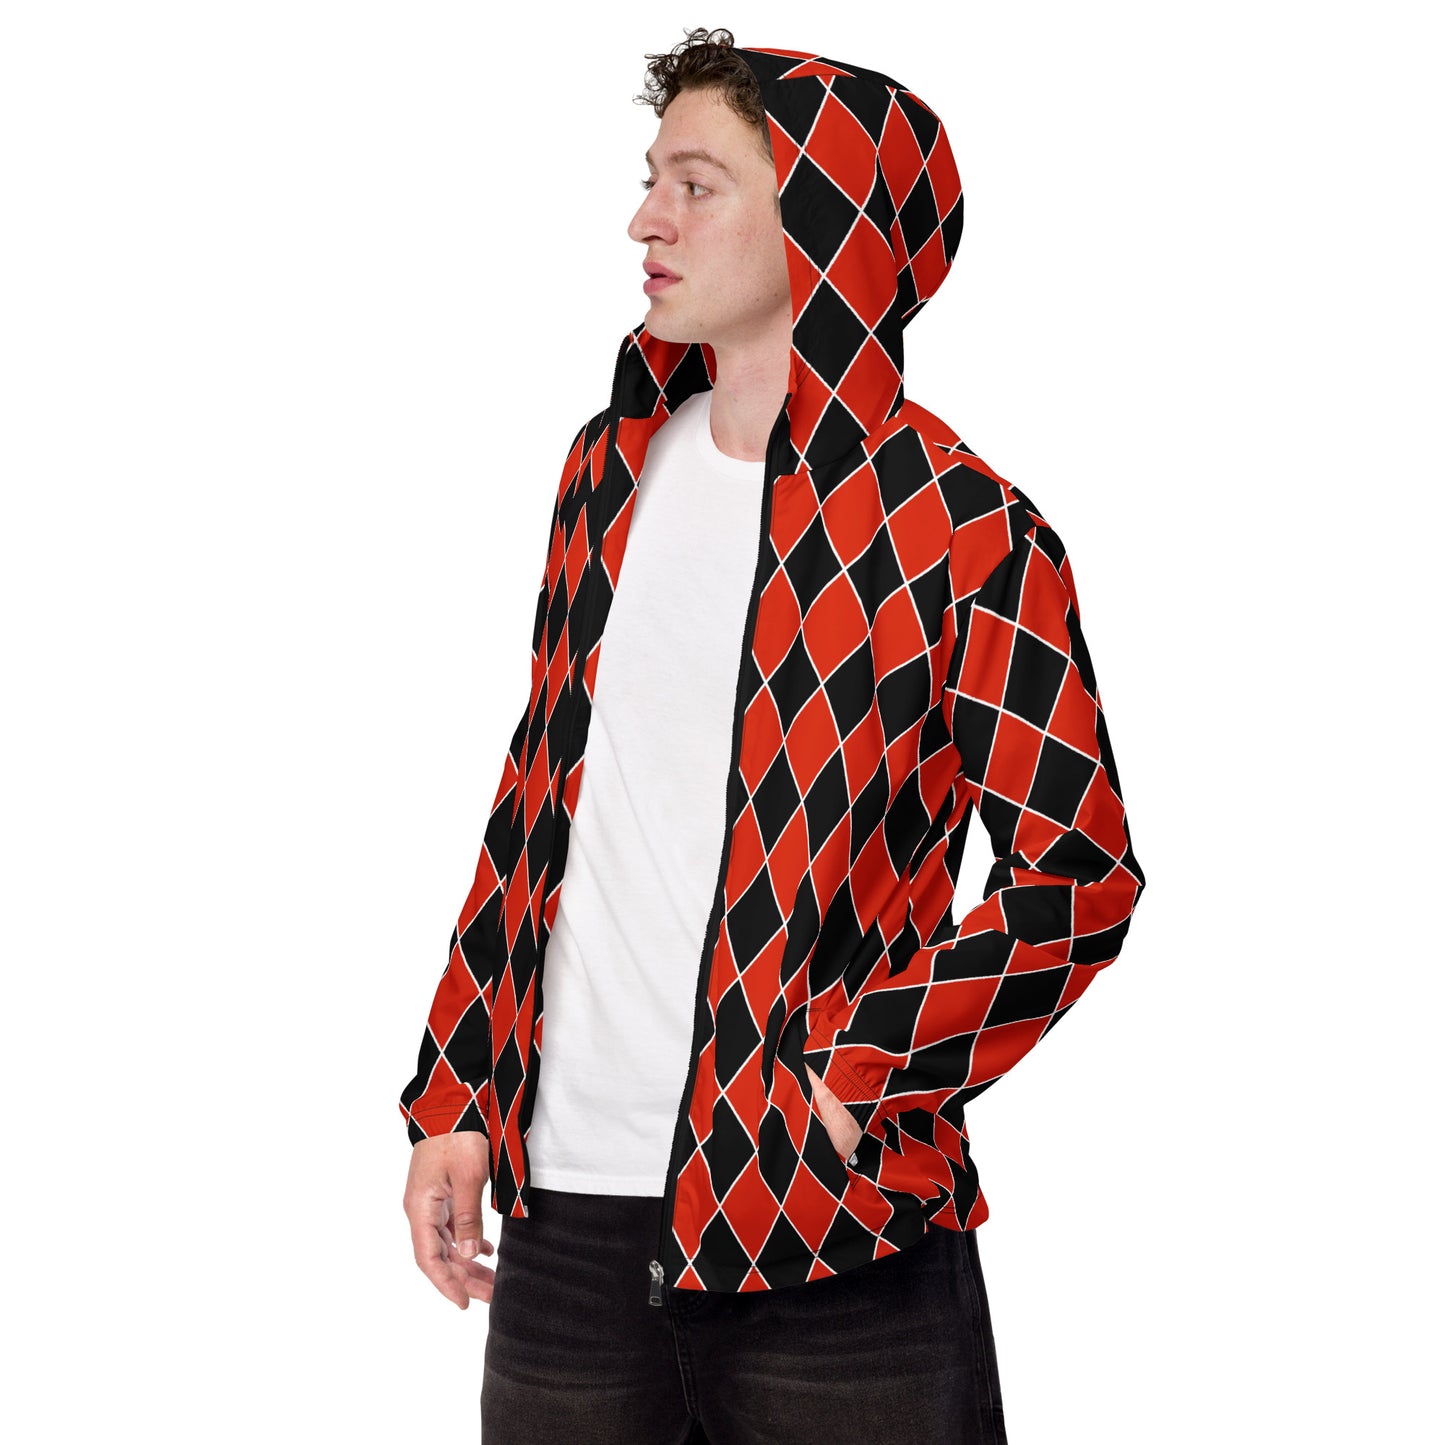 Red Diamond - Inspired By Harry Styles - Sustainably Made Men’s windbreaker